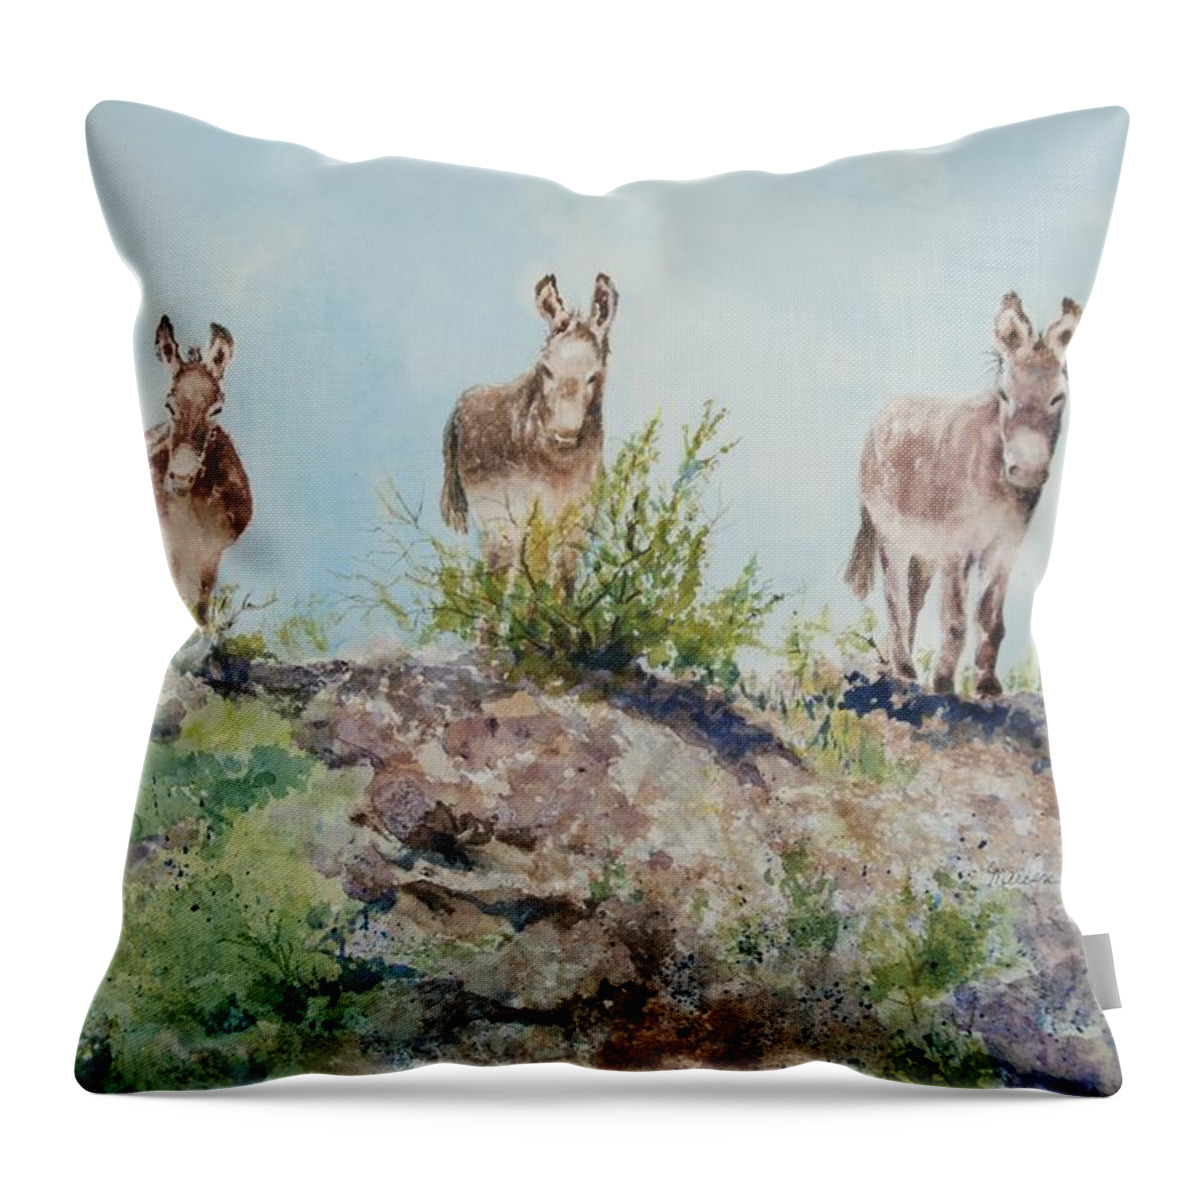 Donkeys Throw Pillow featuring the painting Donkeys by Marilyn Clement